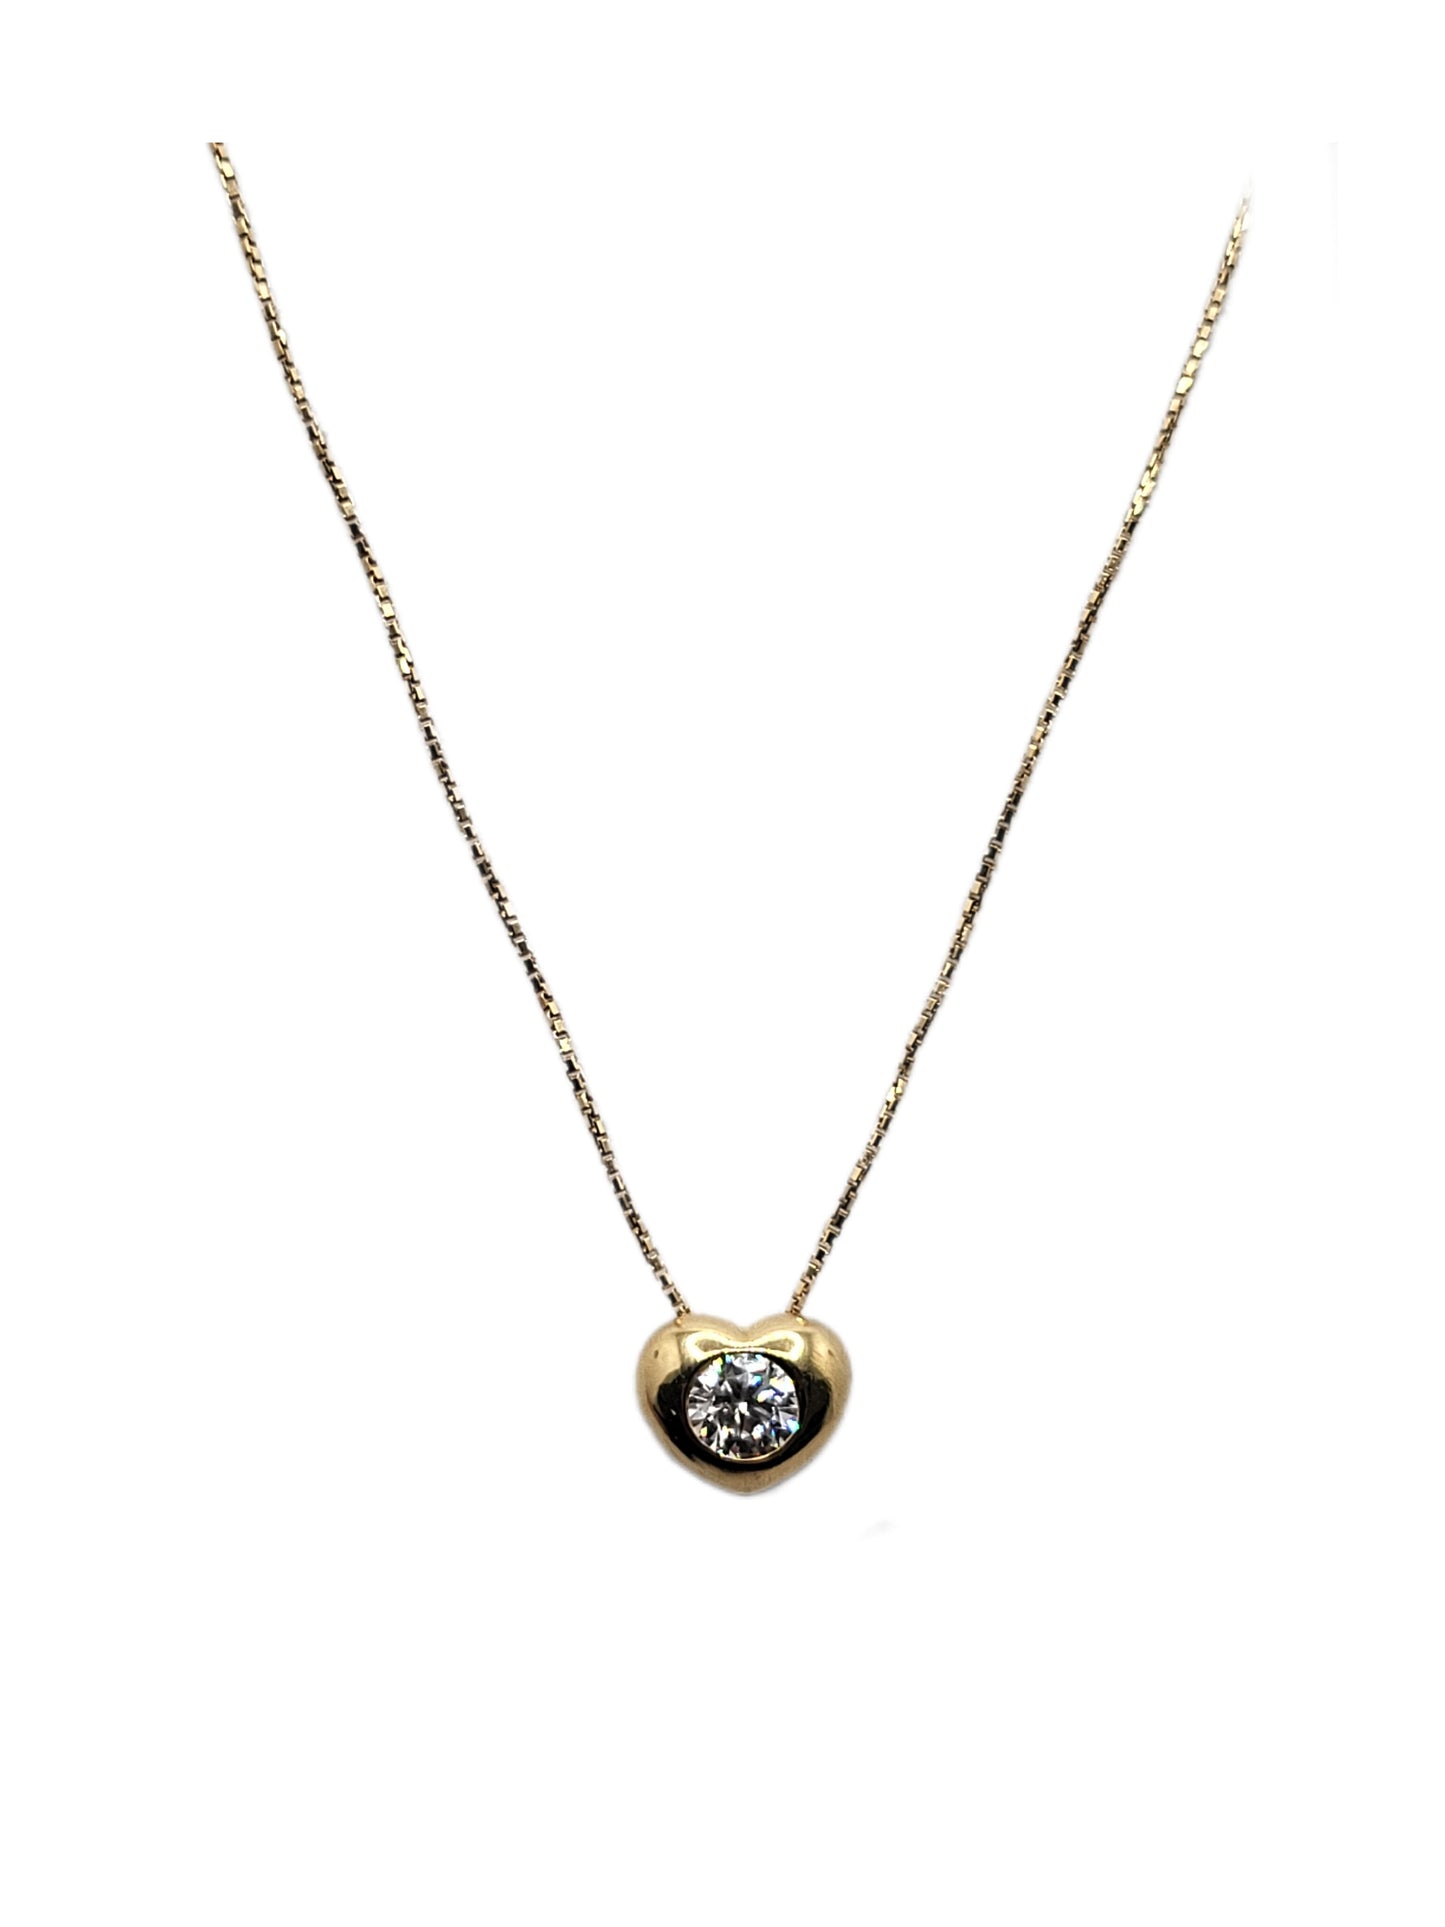 Necklace with Heart Gold 18k